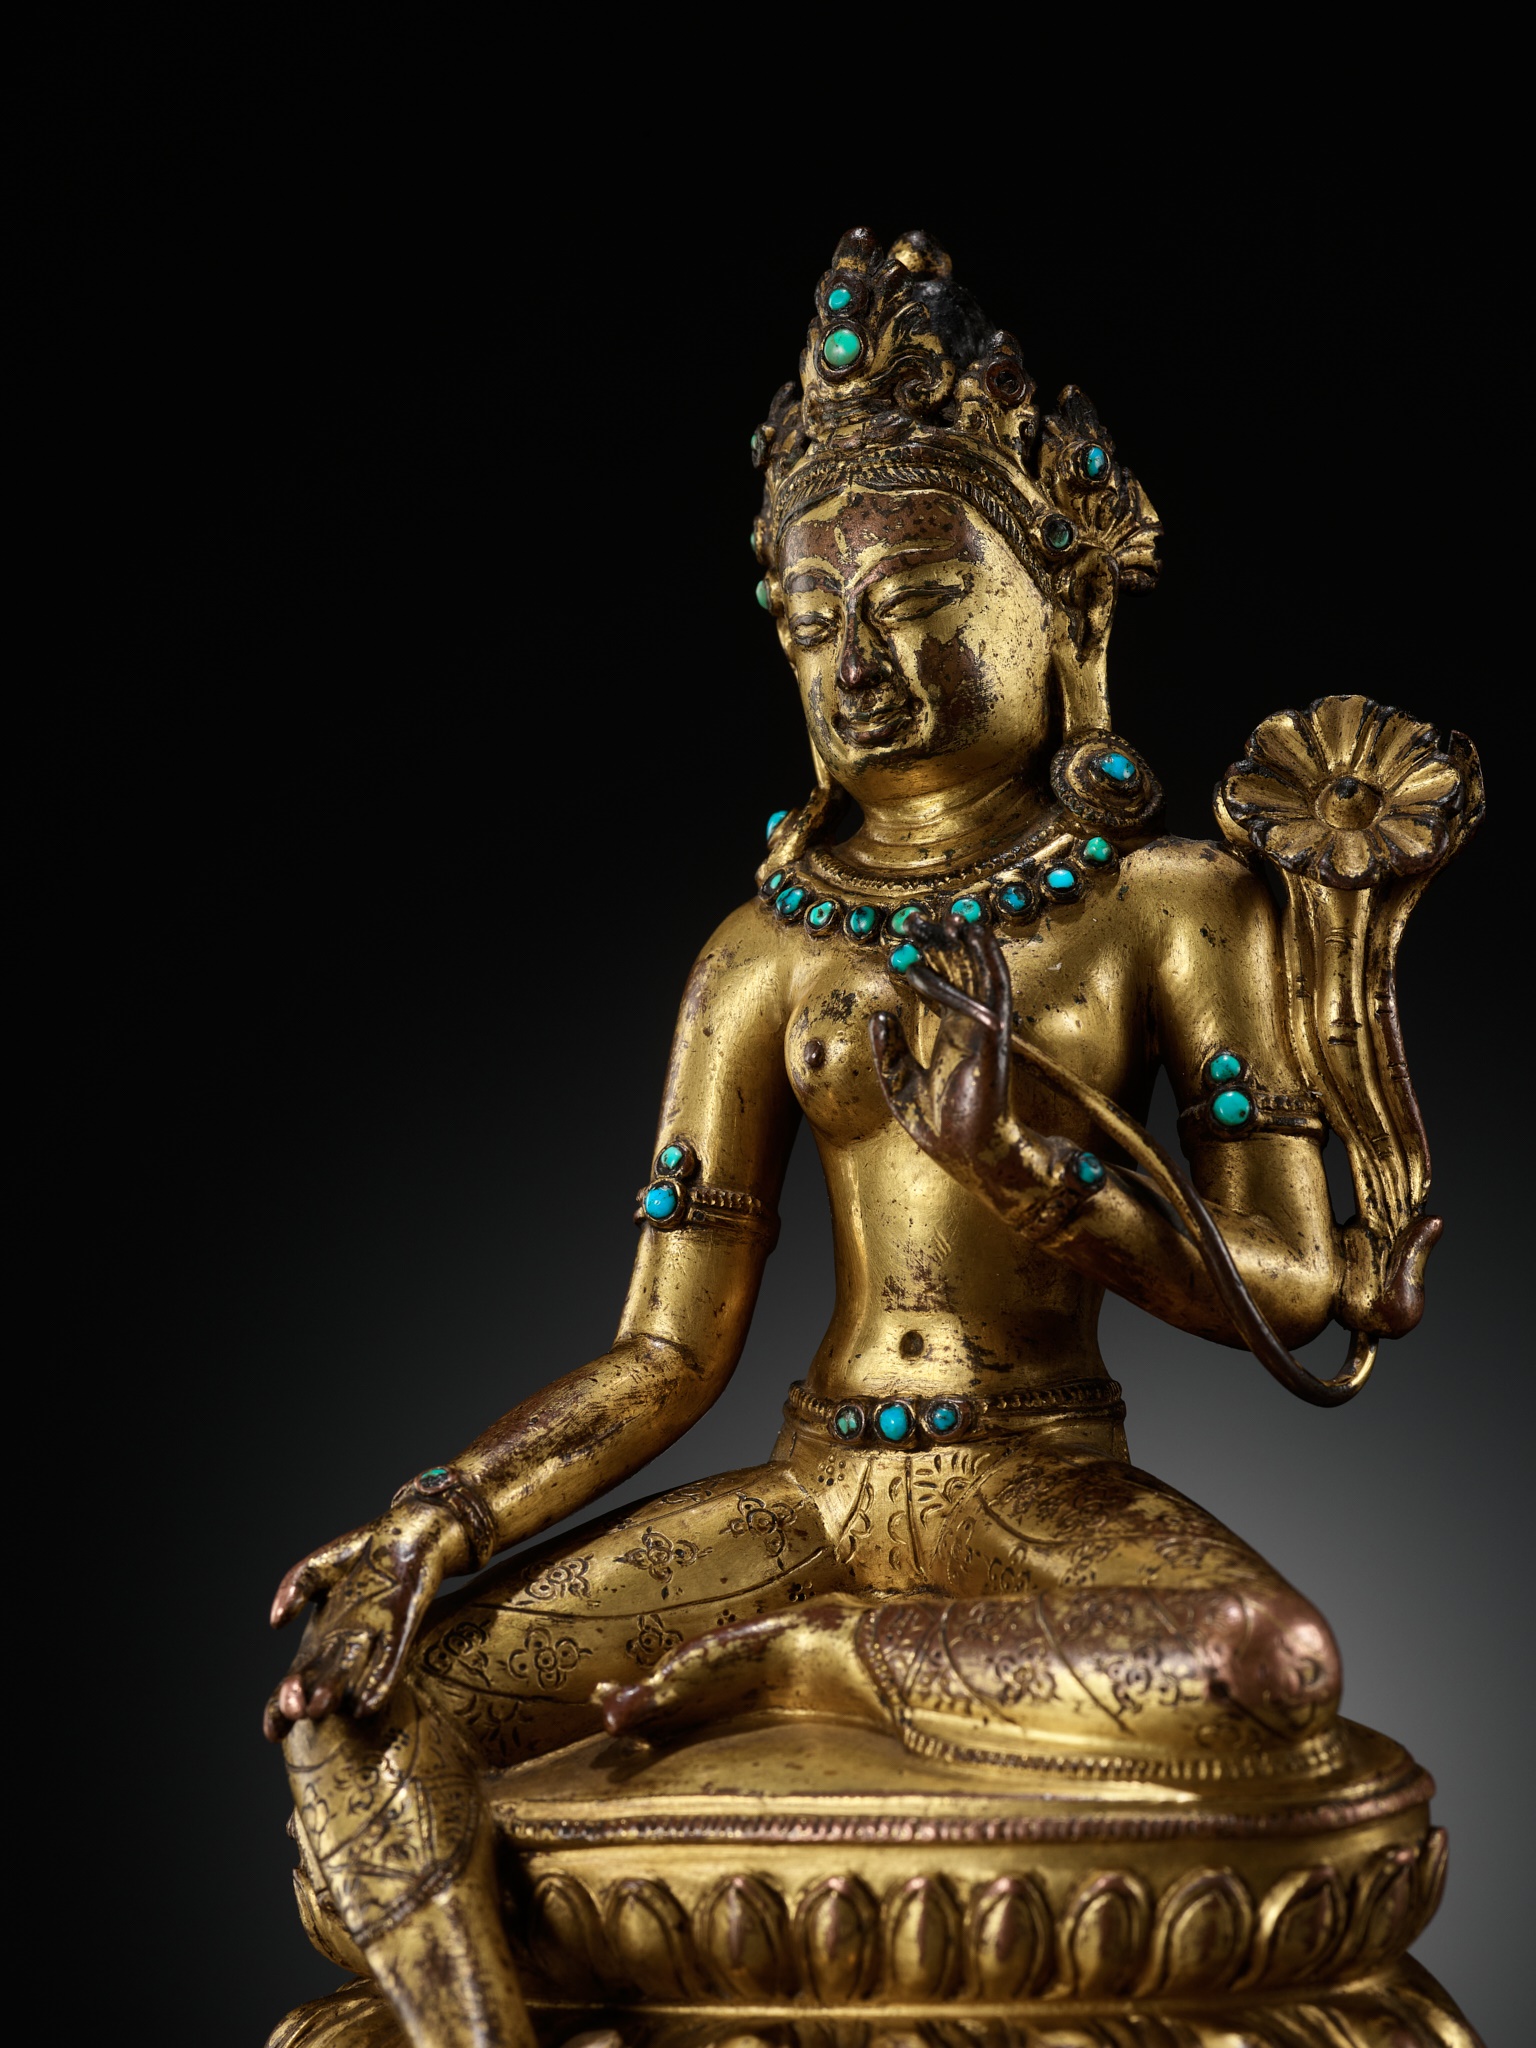 A GILT AND TURQUOISE-INLAID COPPER ALLOY FIGURE OF GREEN TARA, DENSATIL STYLE, TIBET, 14TH CENTURY - Image 9 of 16